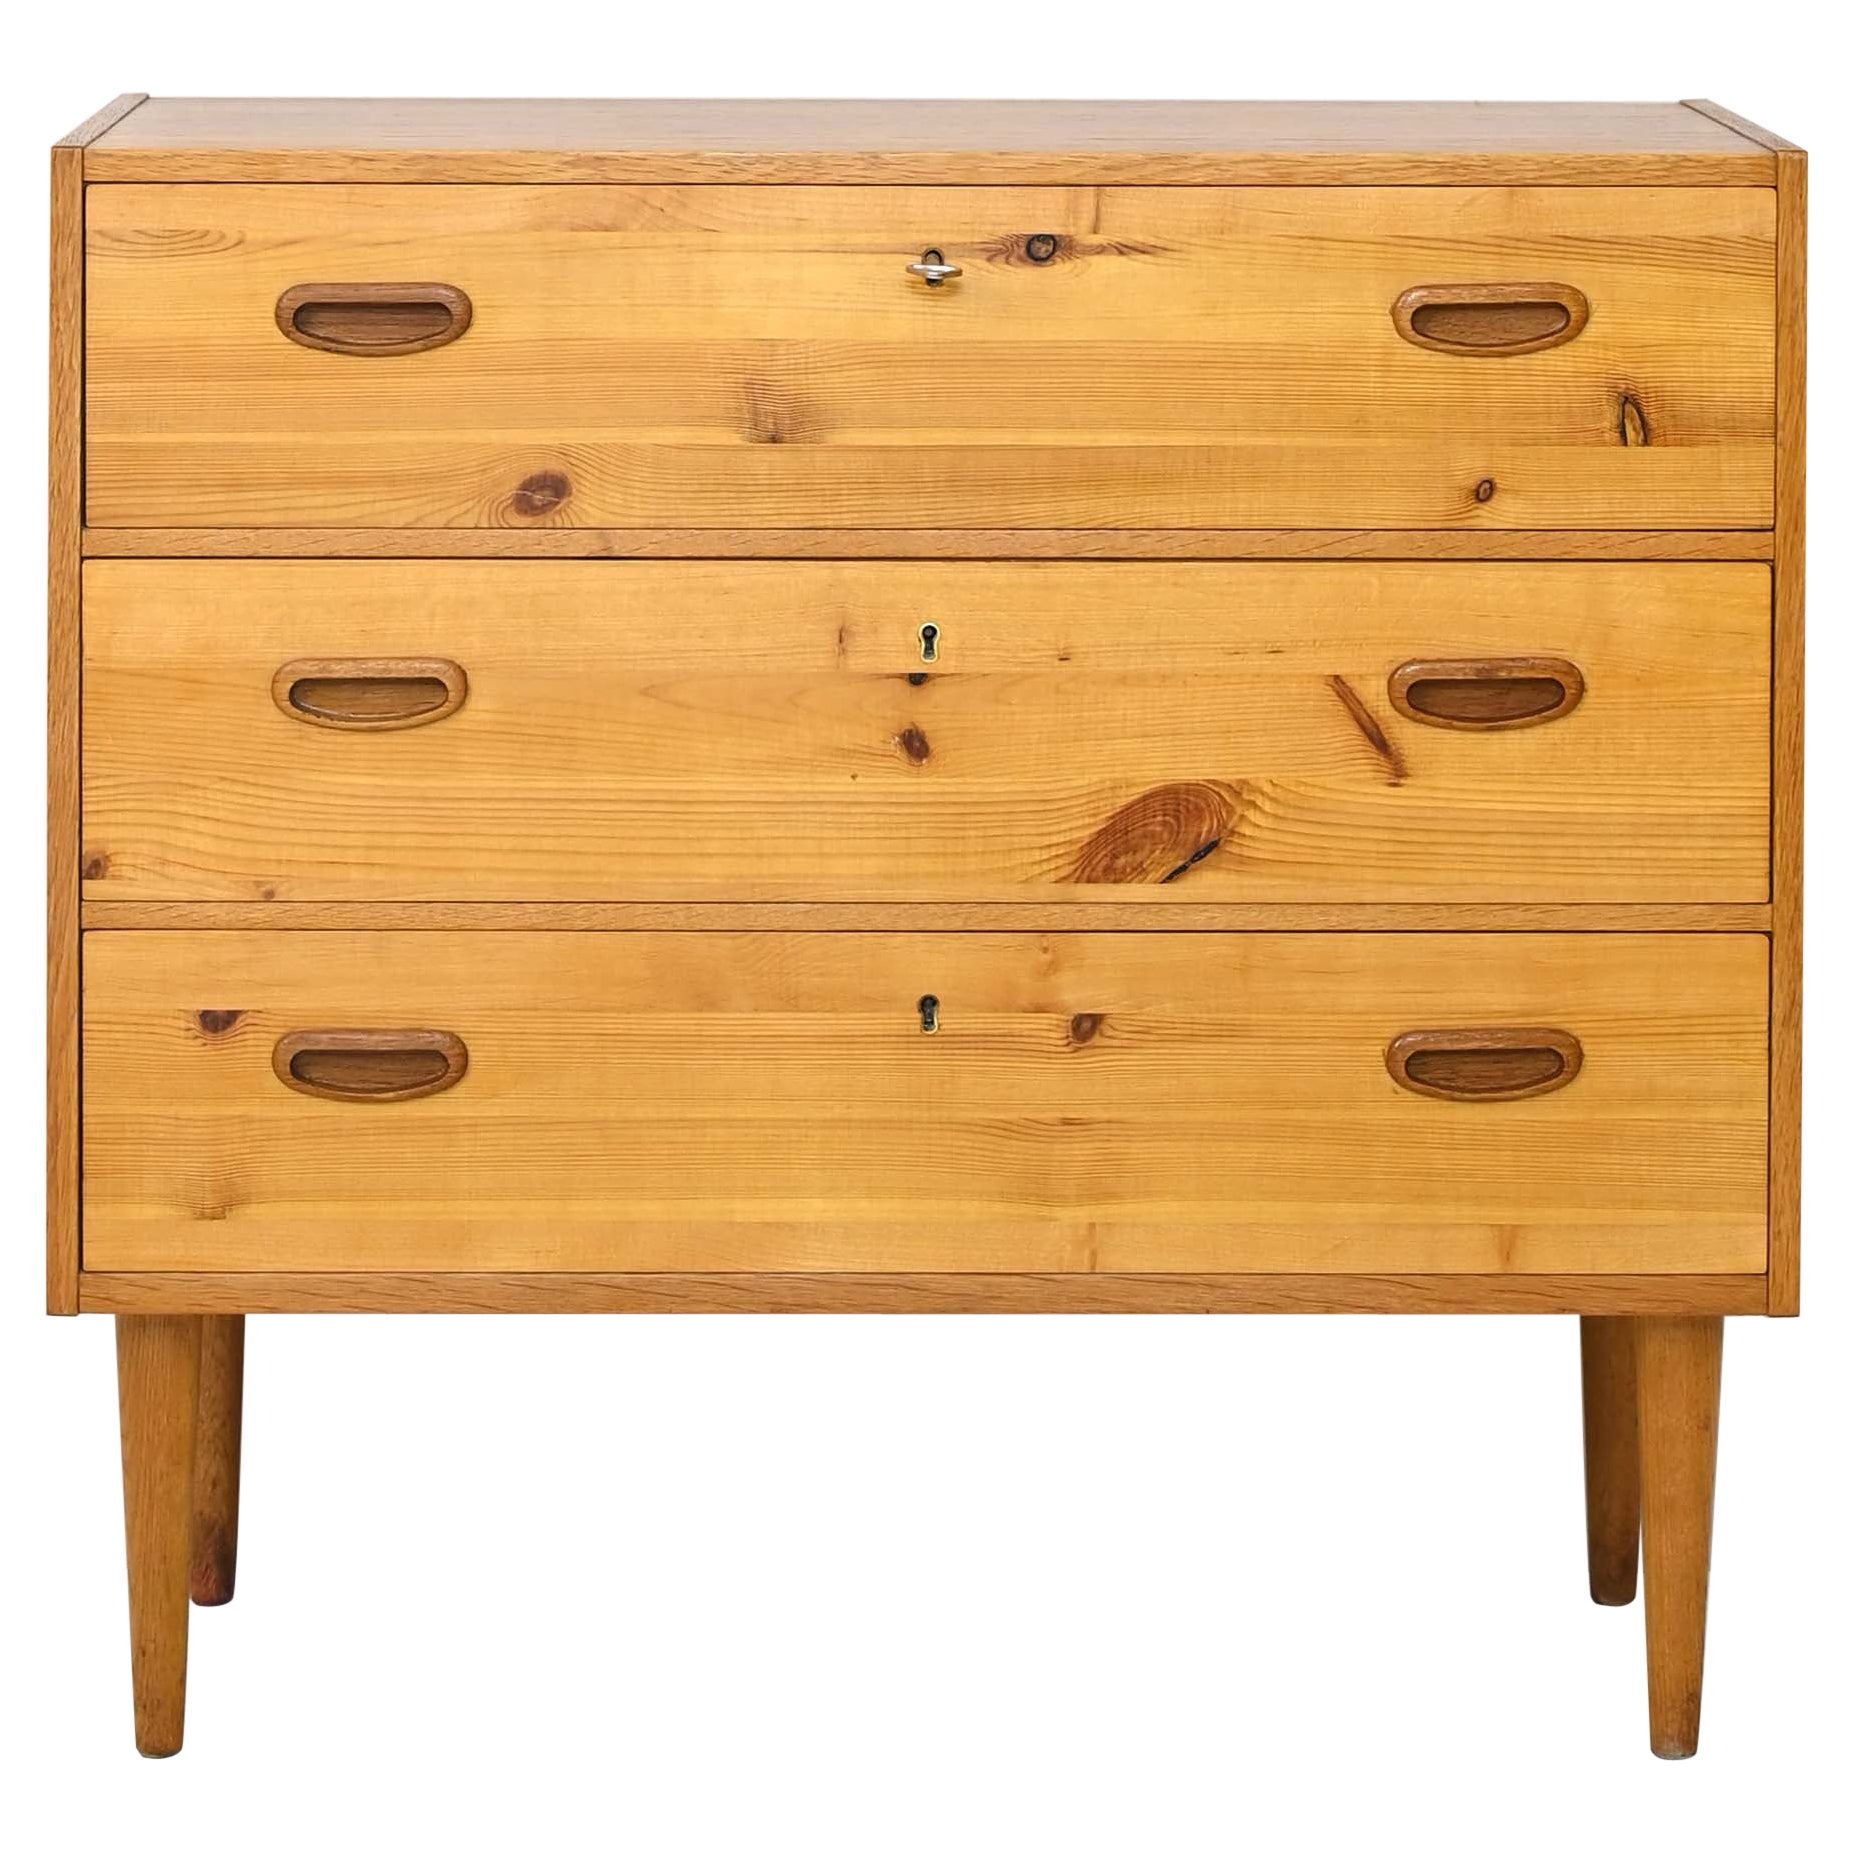 Swedish Modernist Chest of Drawers from the 1960s For Sale